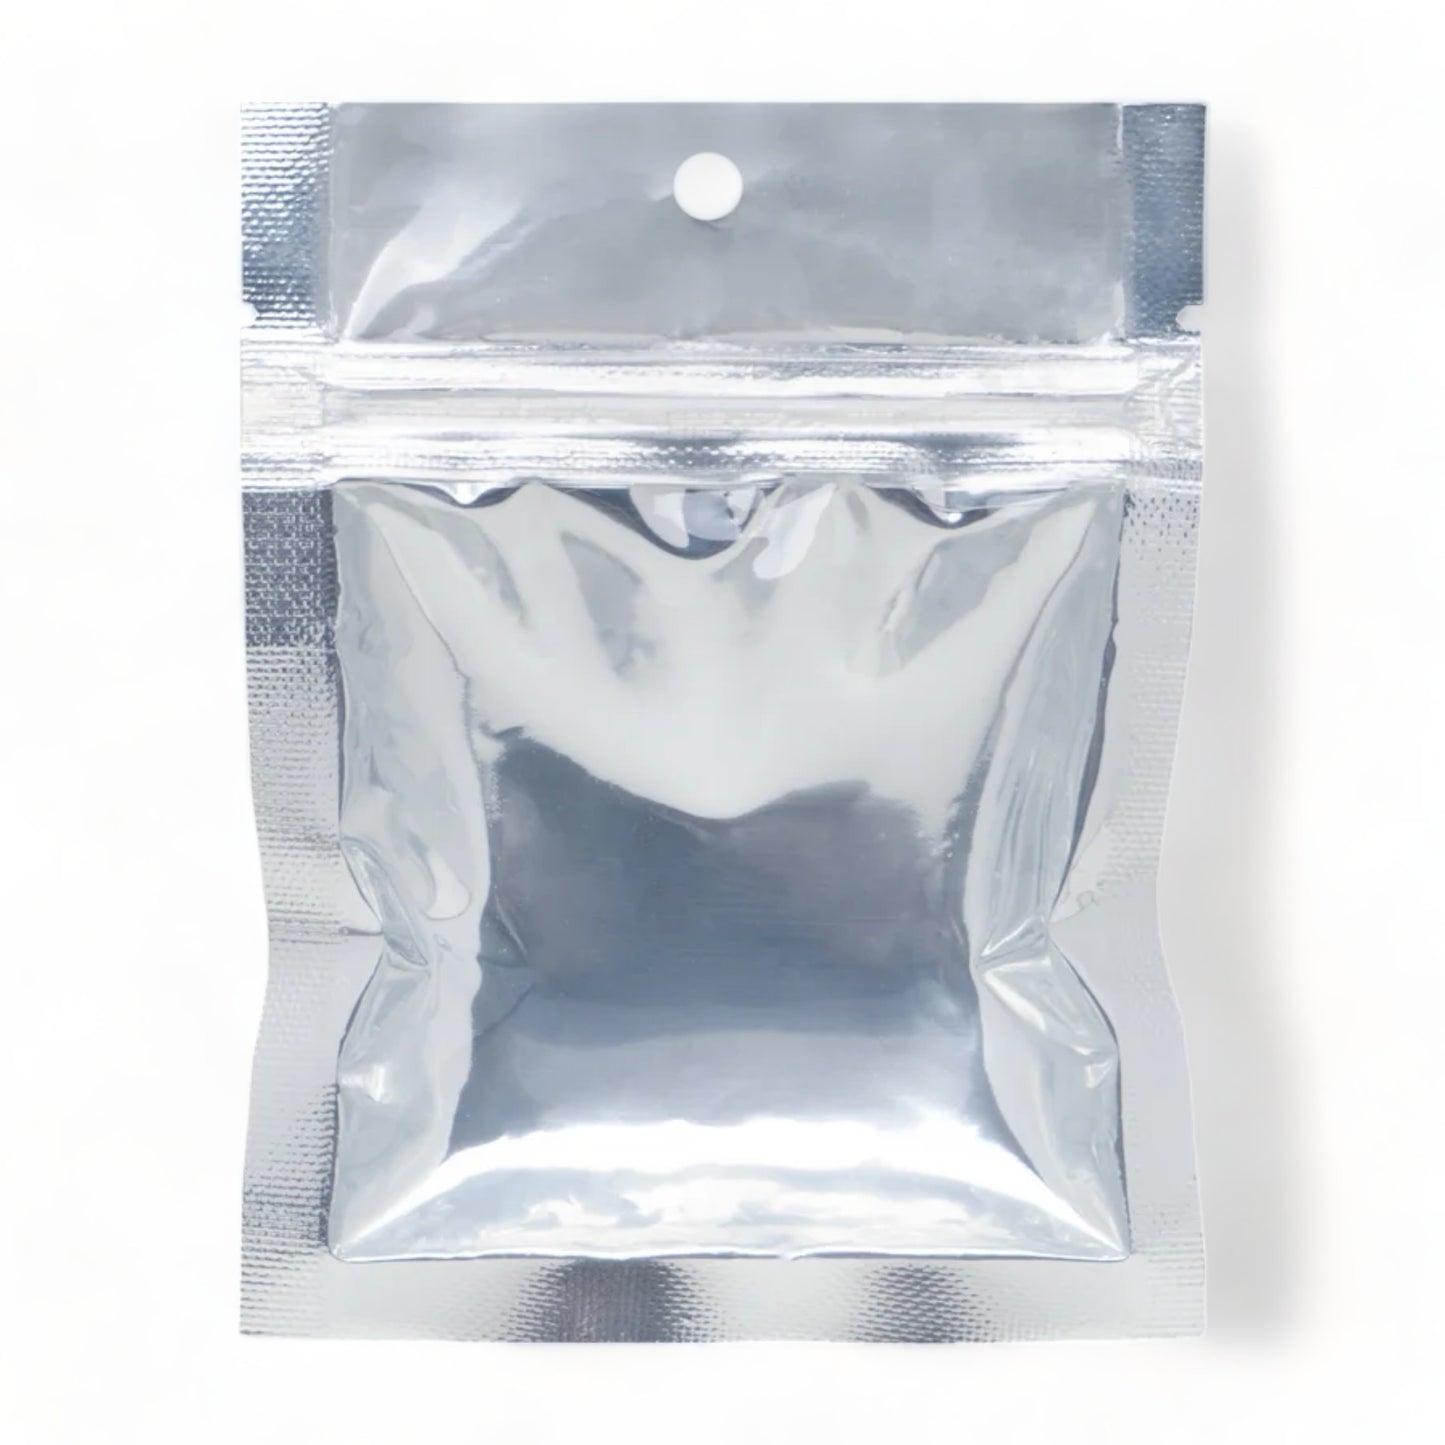 A single metallic seed saving packet on a white background